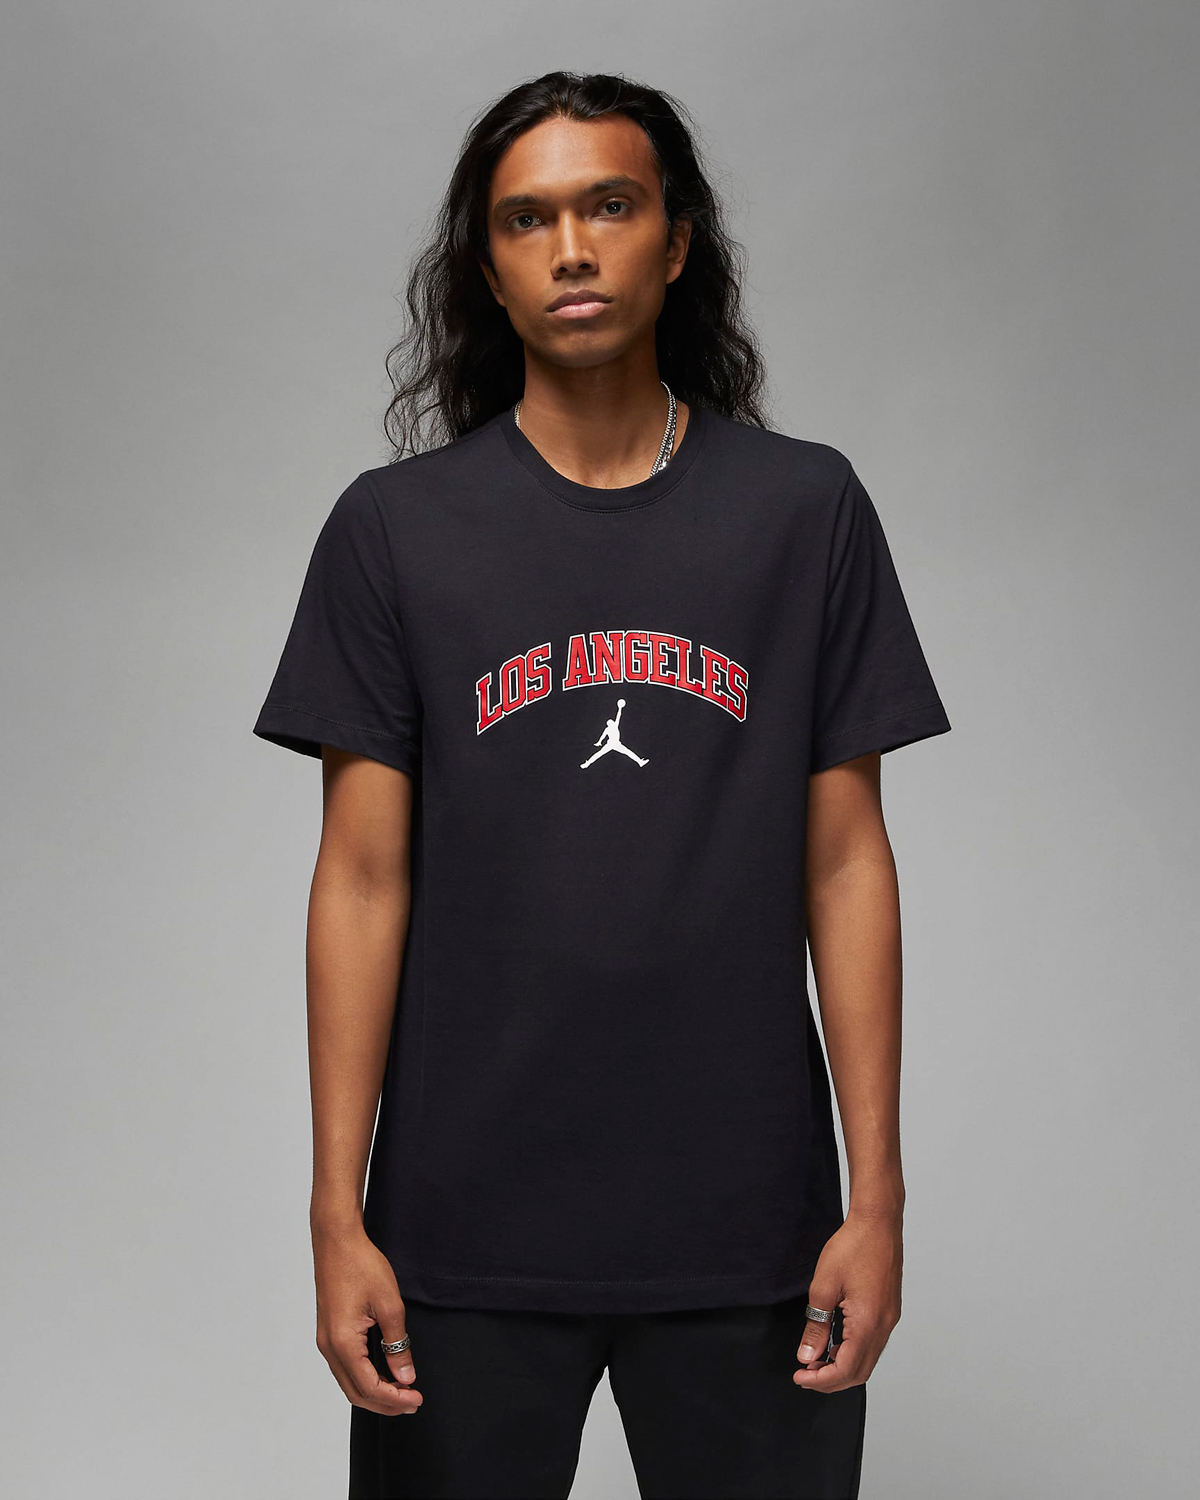 Air Jordan 1 Lost and Found Shirts Clothing and Outfits